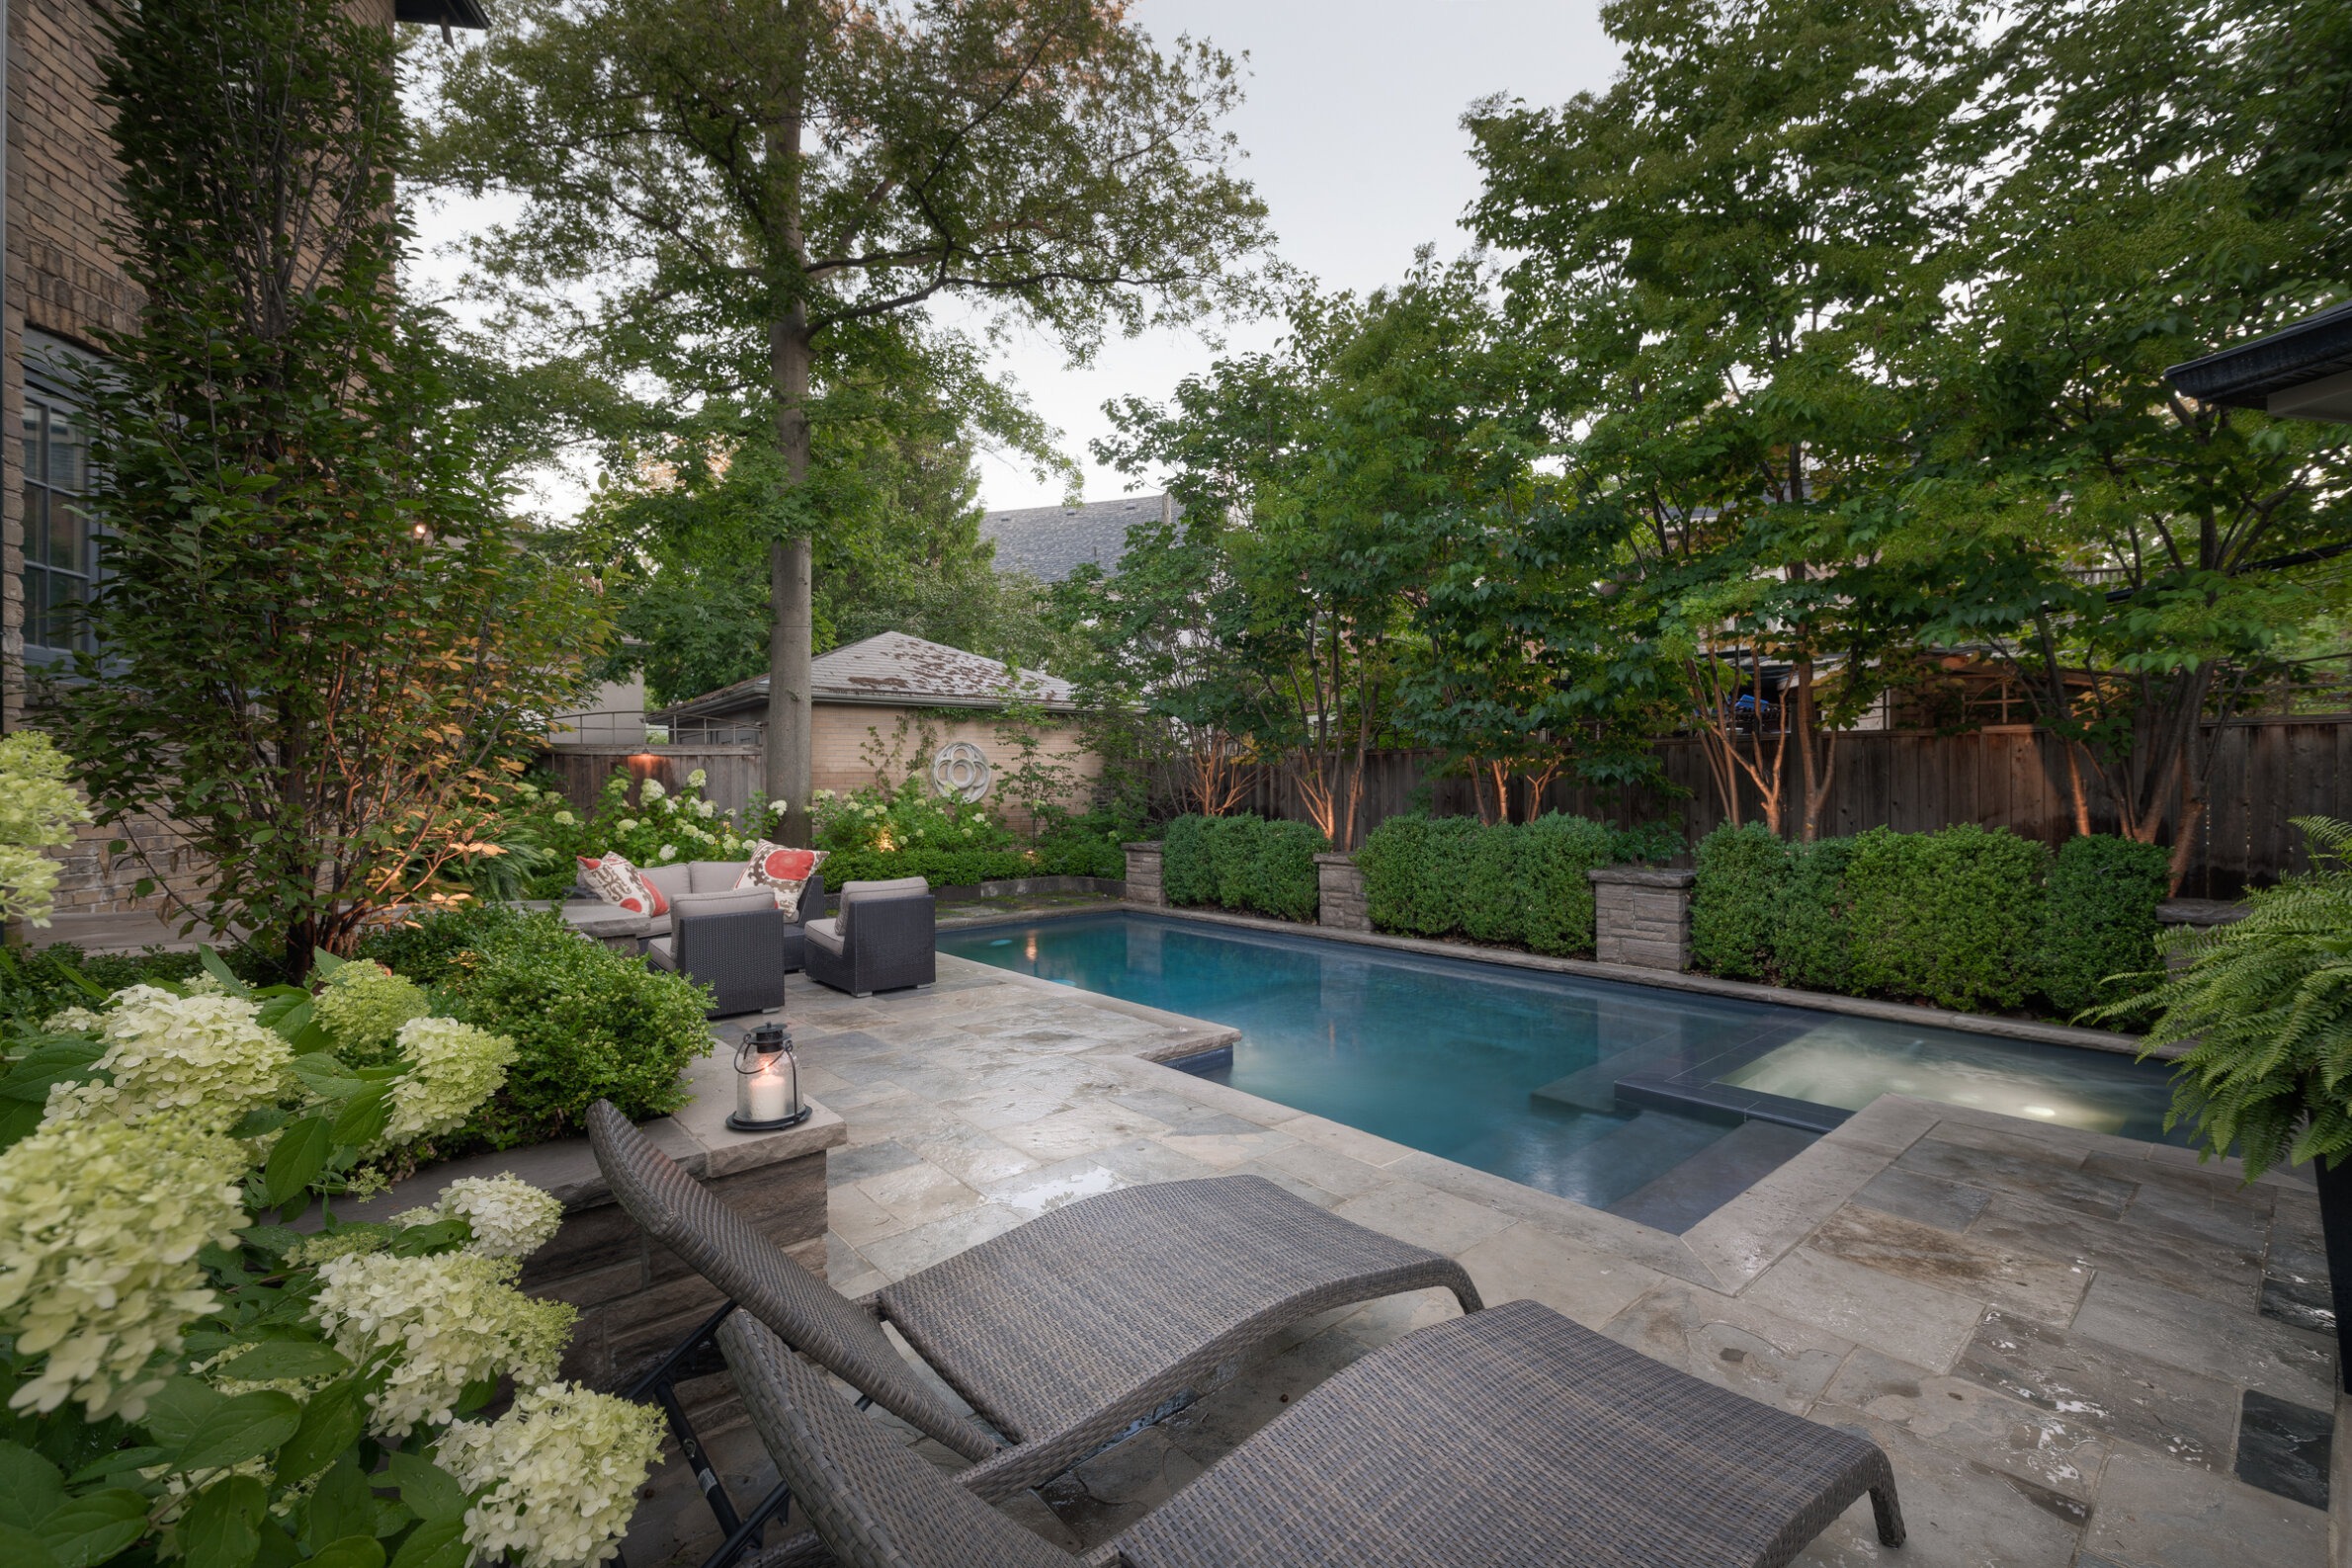 An inviting backyard with a pool, stone patio, outdoor furniture, lush greenery, and a lantern, exuding a serene, relaxing ambiance in a residential setting.